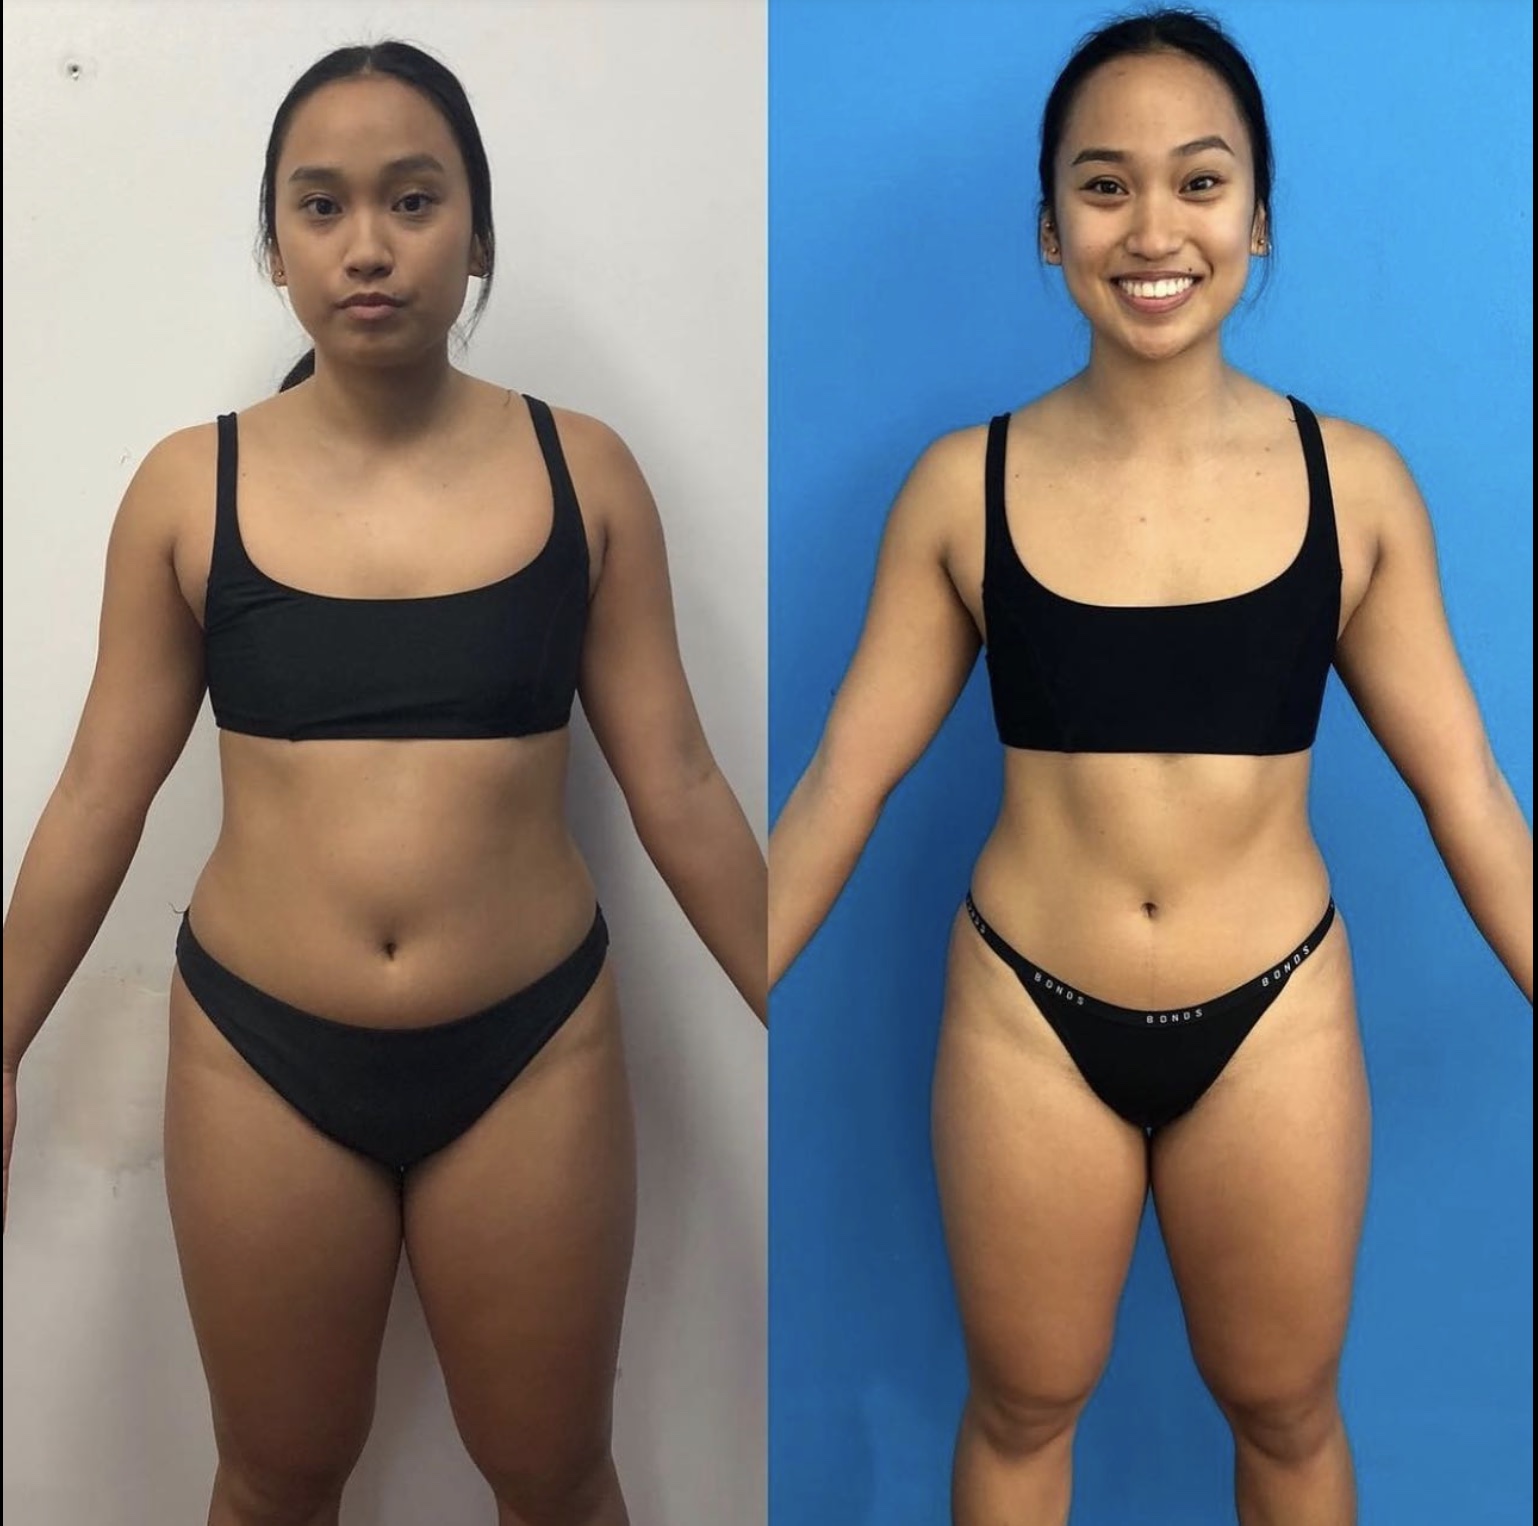 female girl weight loss before and after exercise photo lost 7 kgs from cardio and strength classes